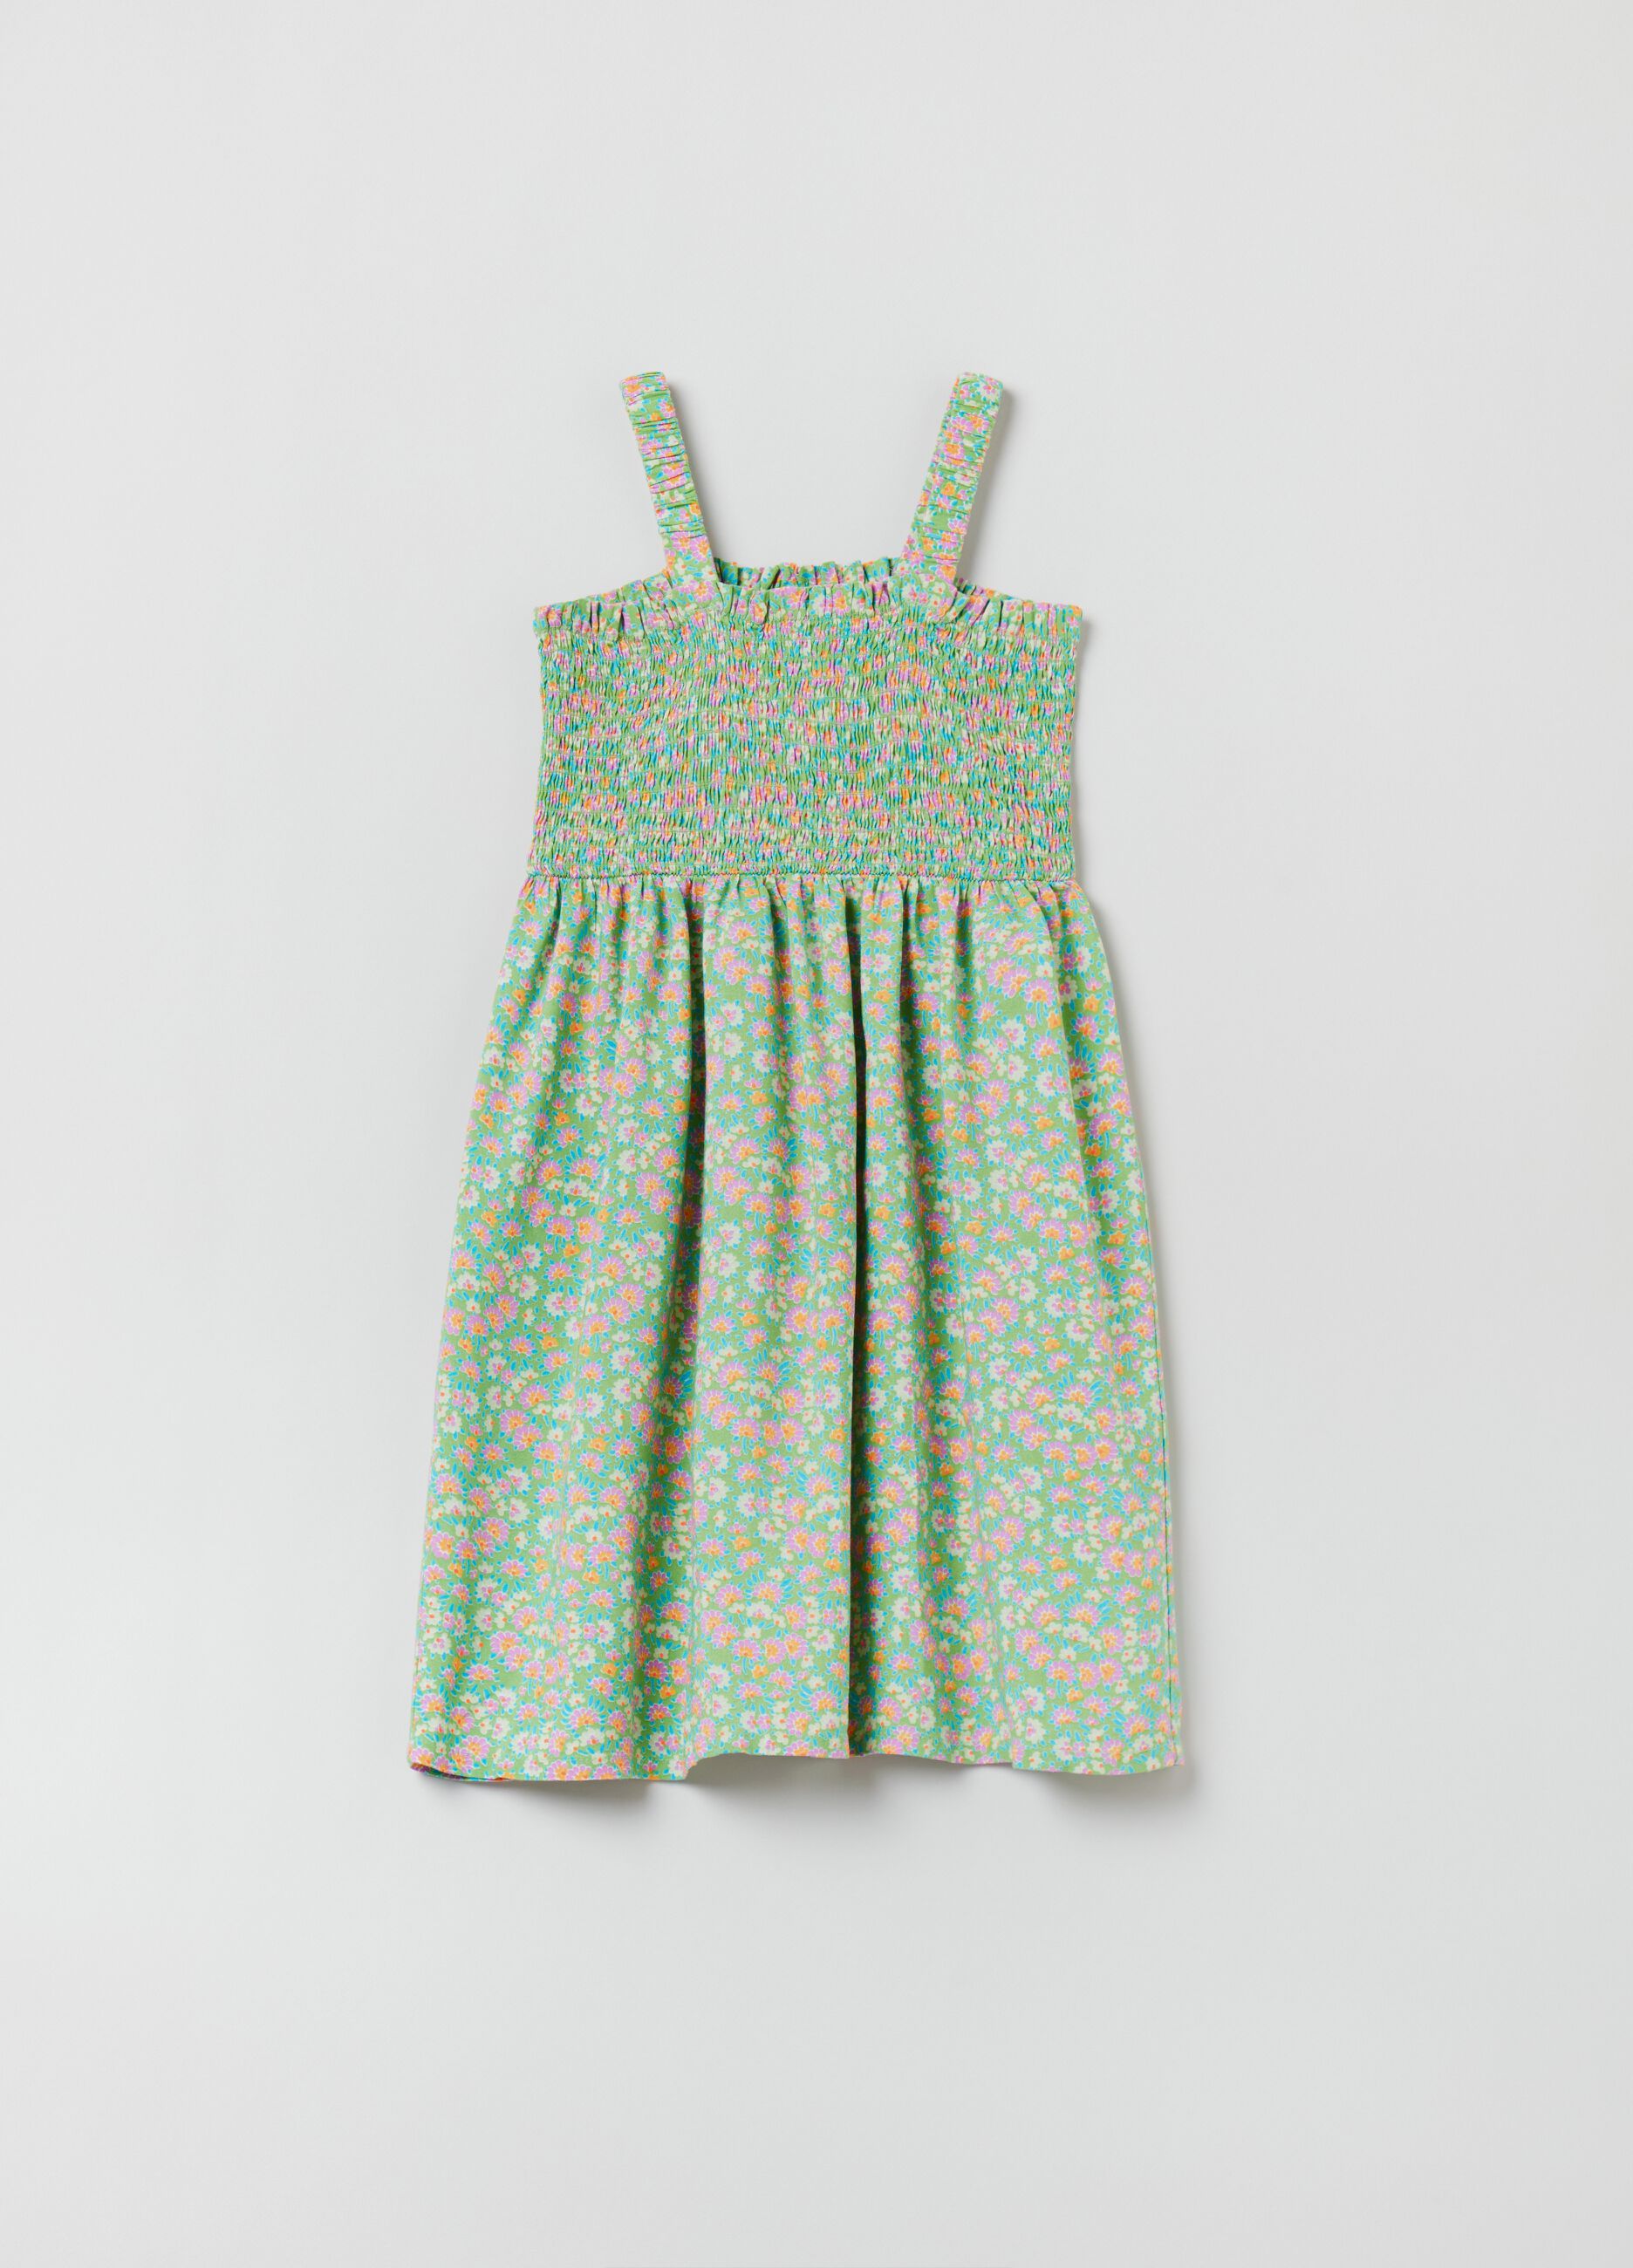 Sleeveless dress in viscose with small flowers print